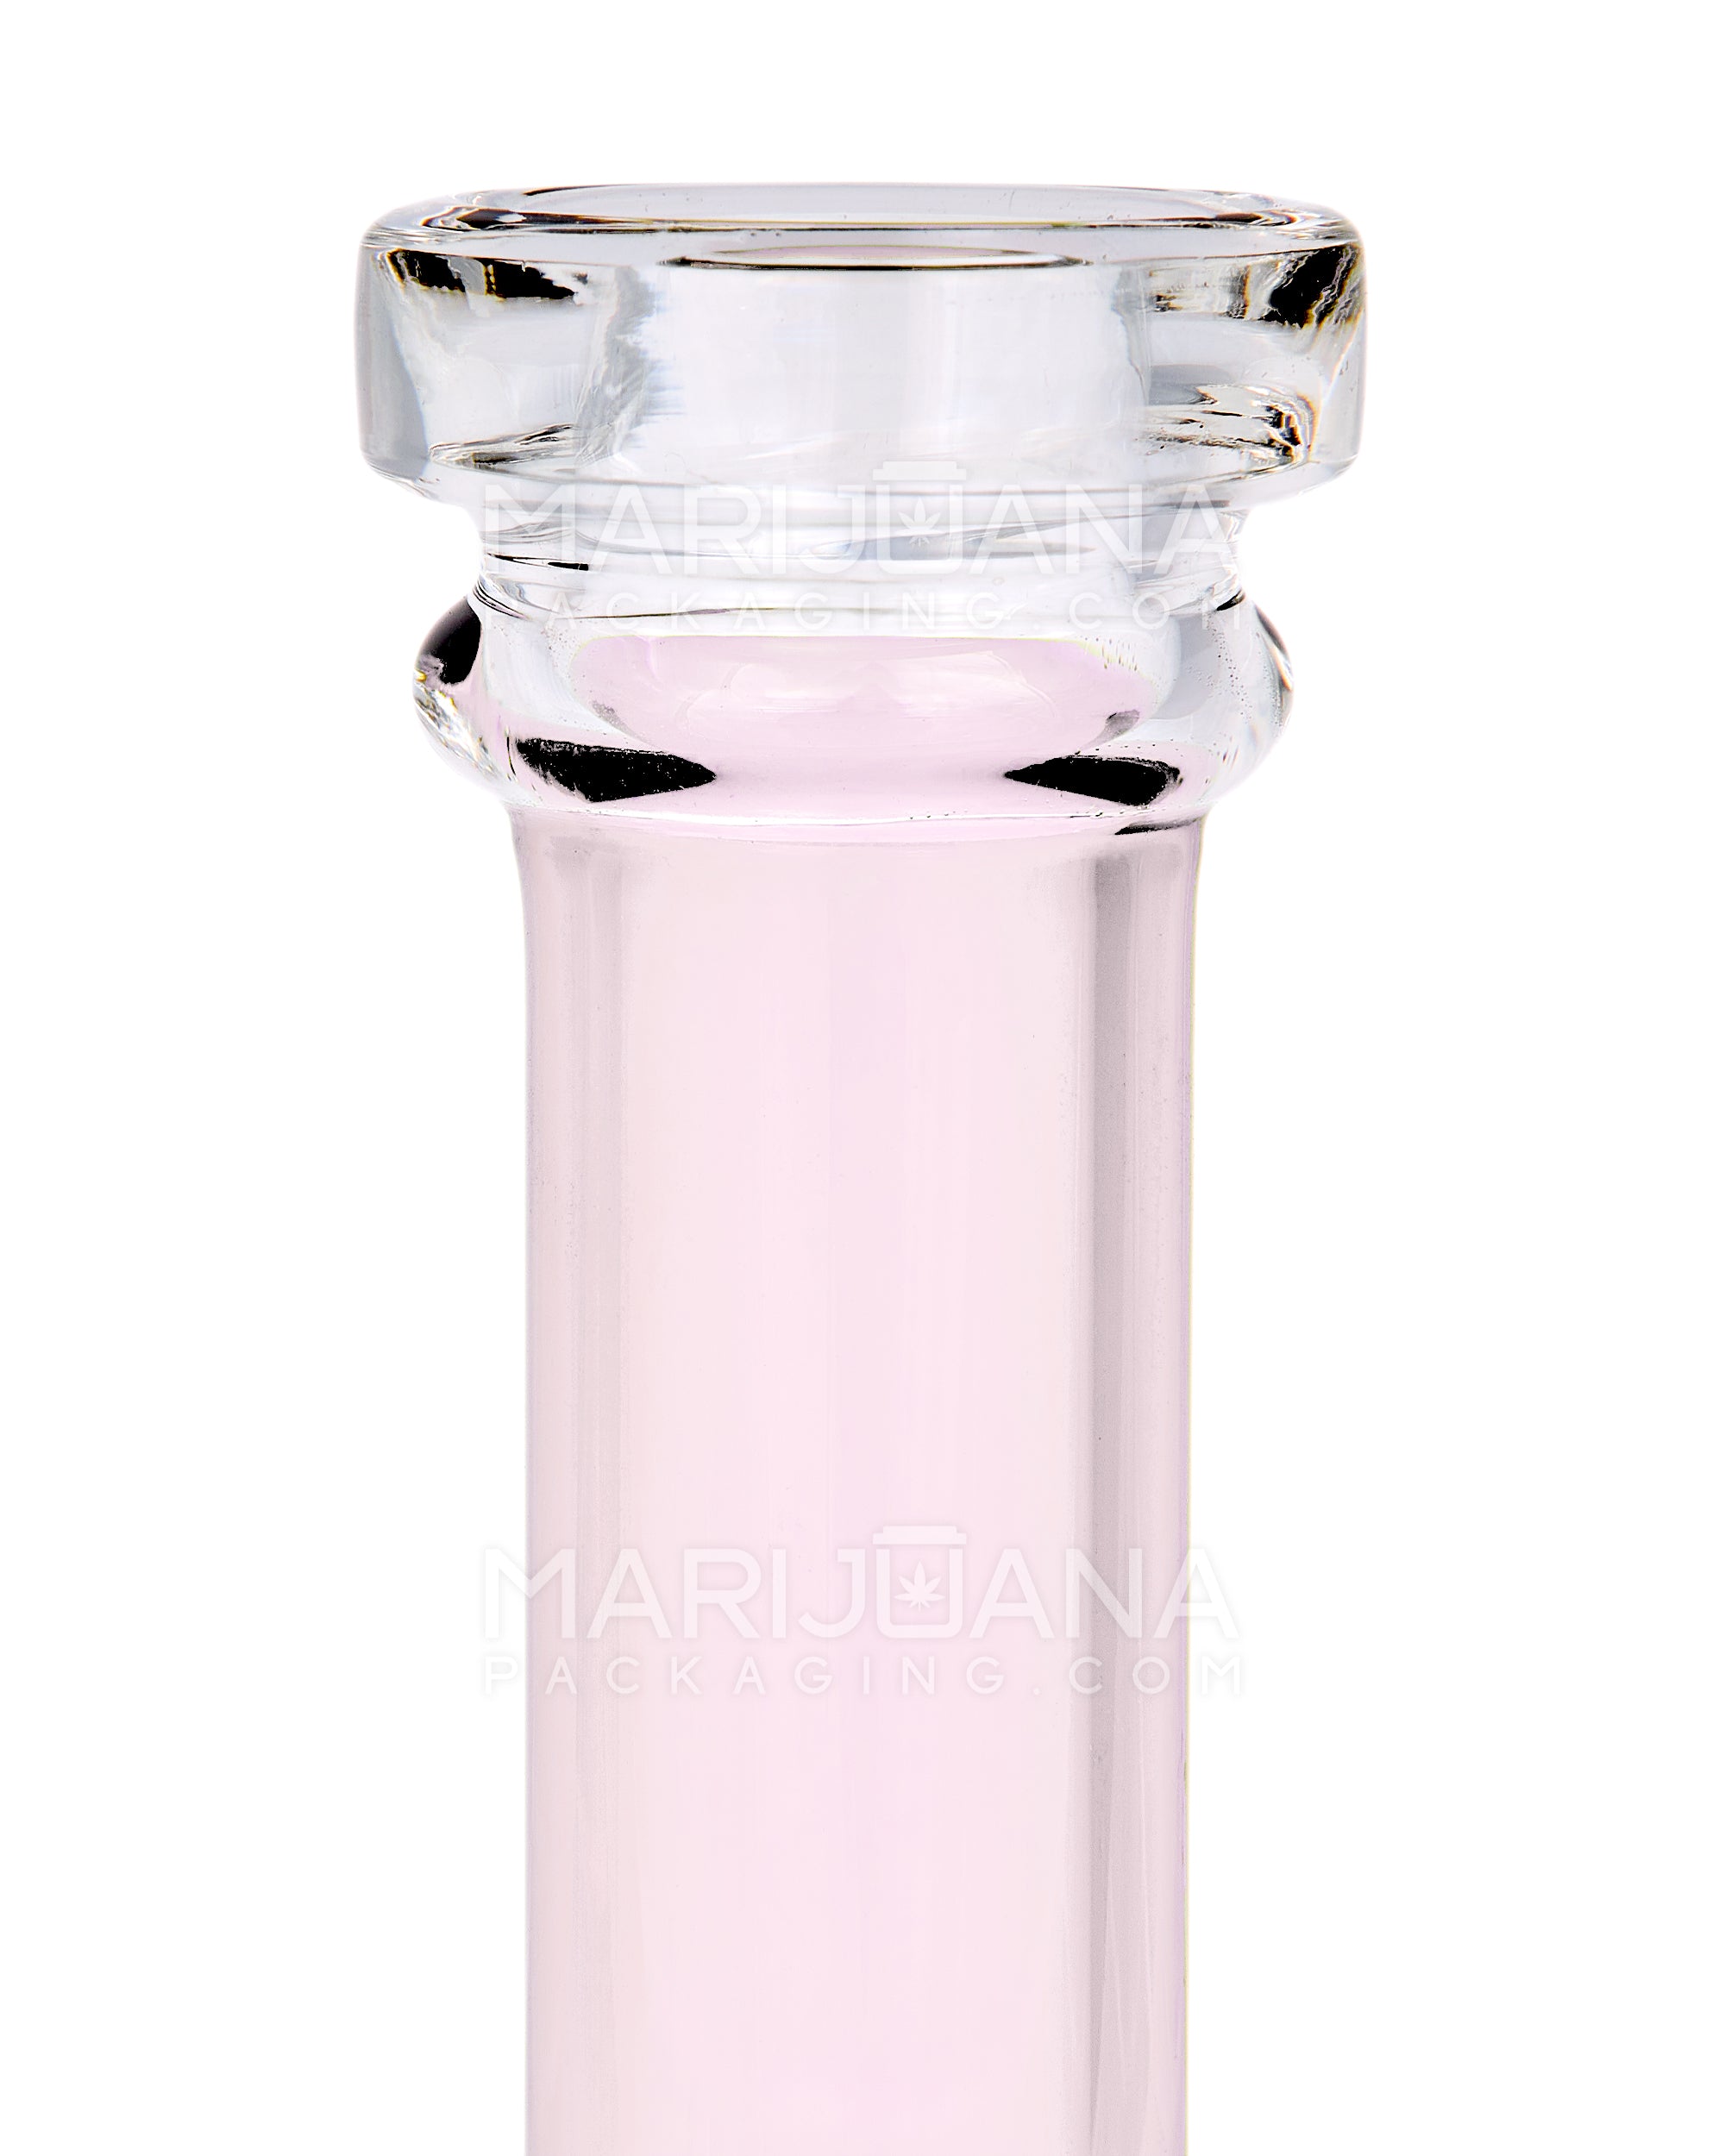 Straight Neck Mushroom Perc Glass Egg Water Pipe w/ Thick Base | 10.5in Tall - 14mm Bowl - Pink - 3